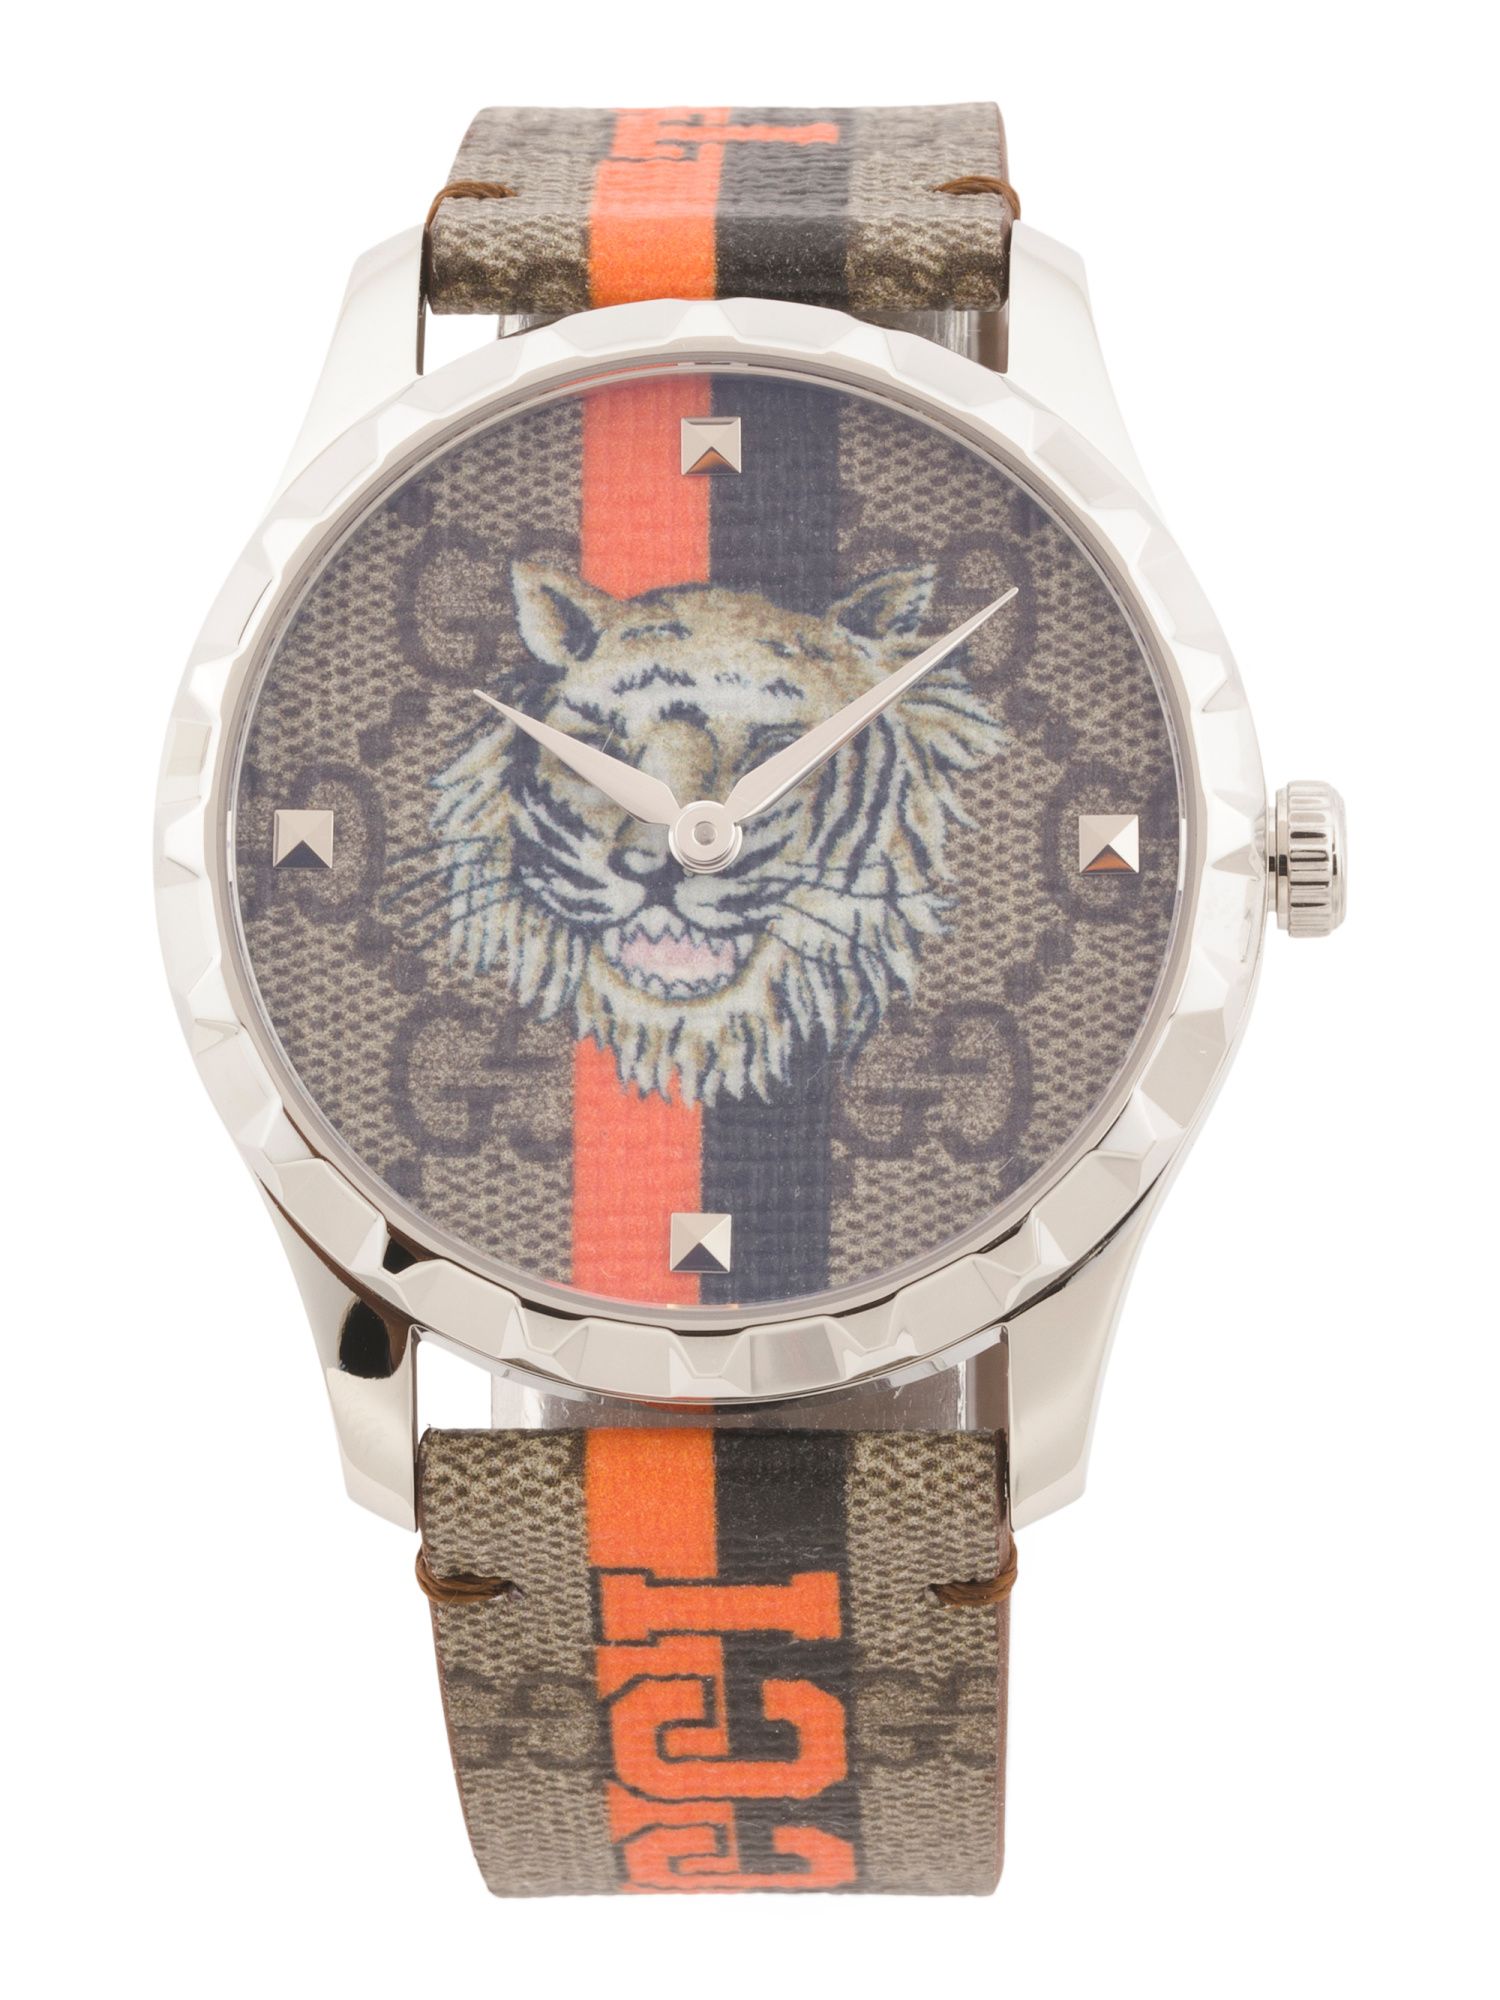 Swiss Made G Timeless Tiger Supreme Leather Strap Watch | TJ Maxx